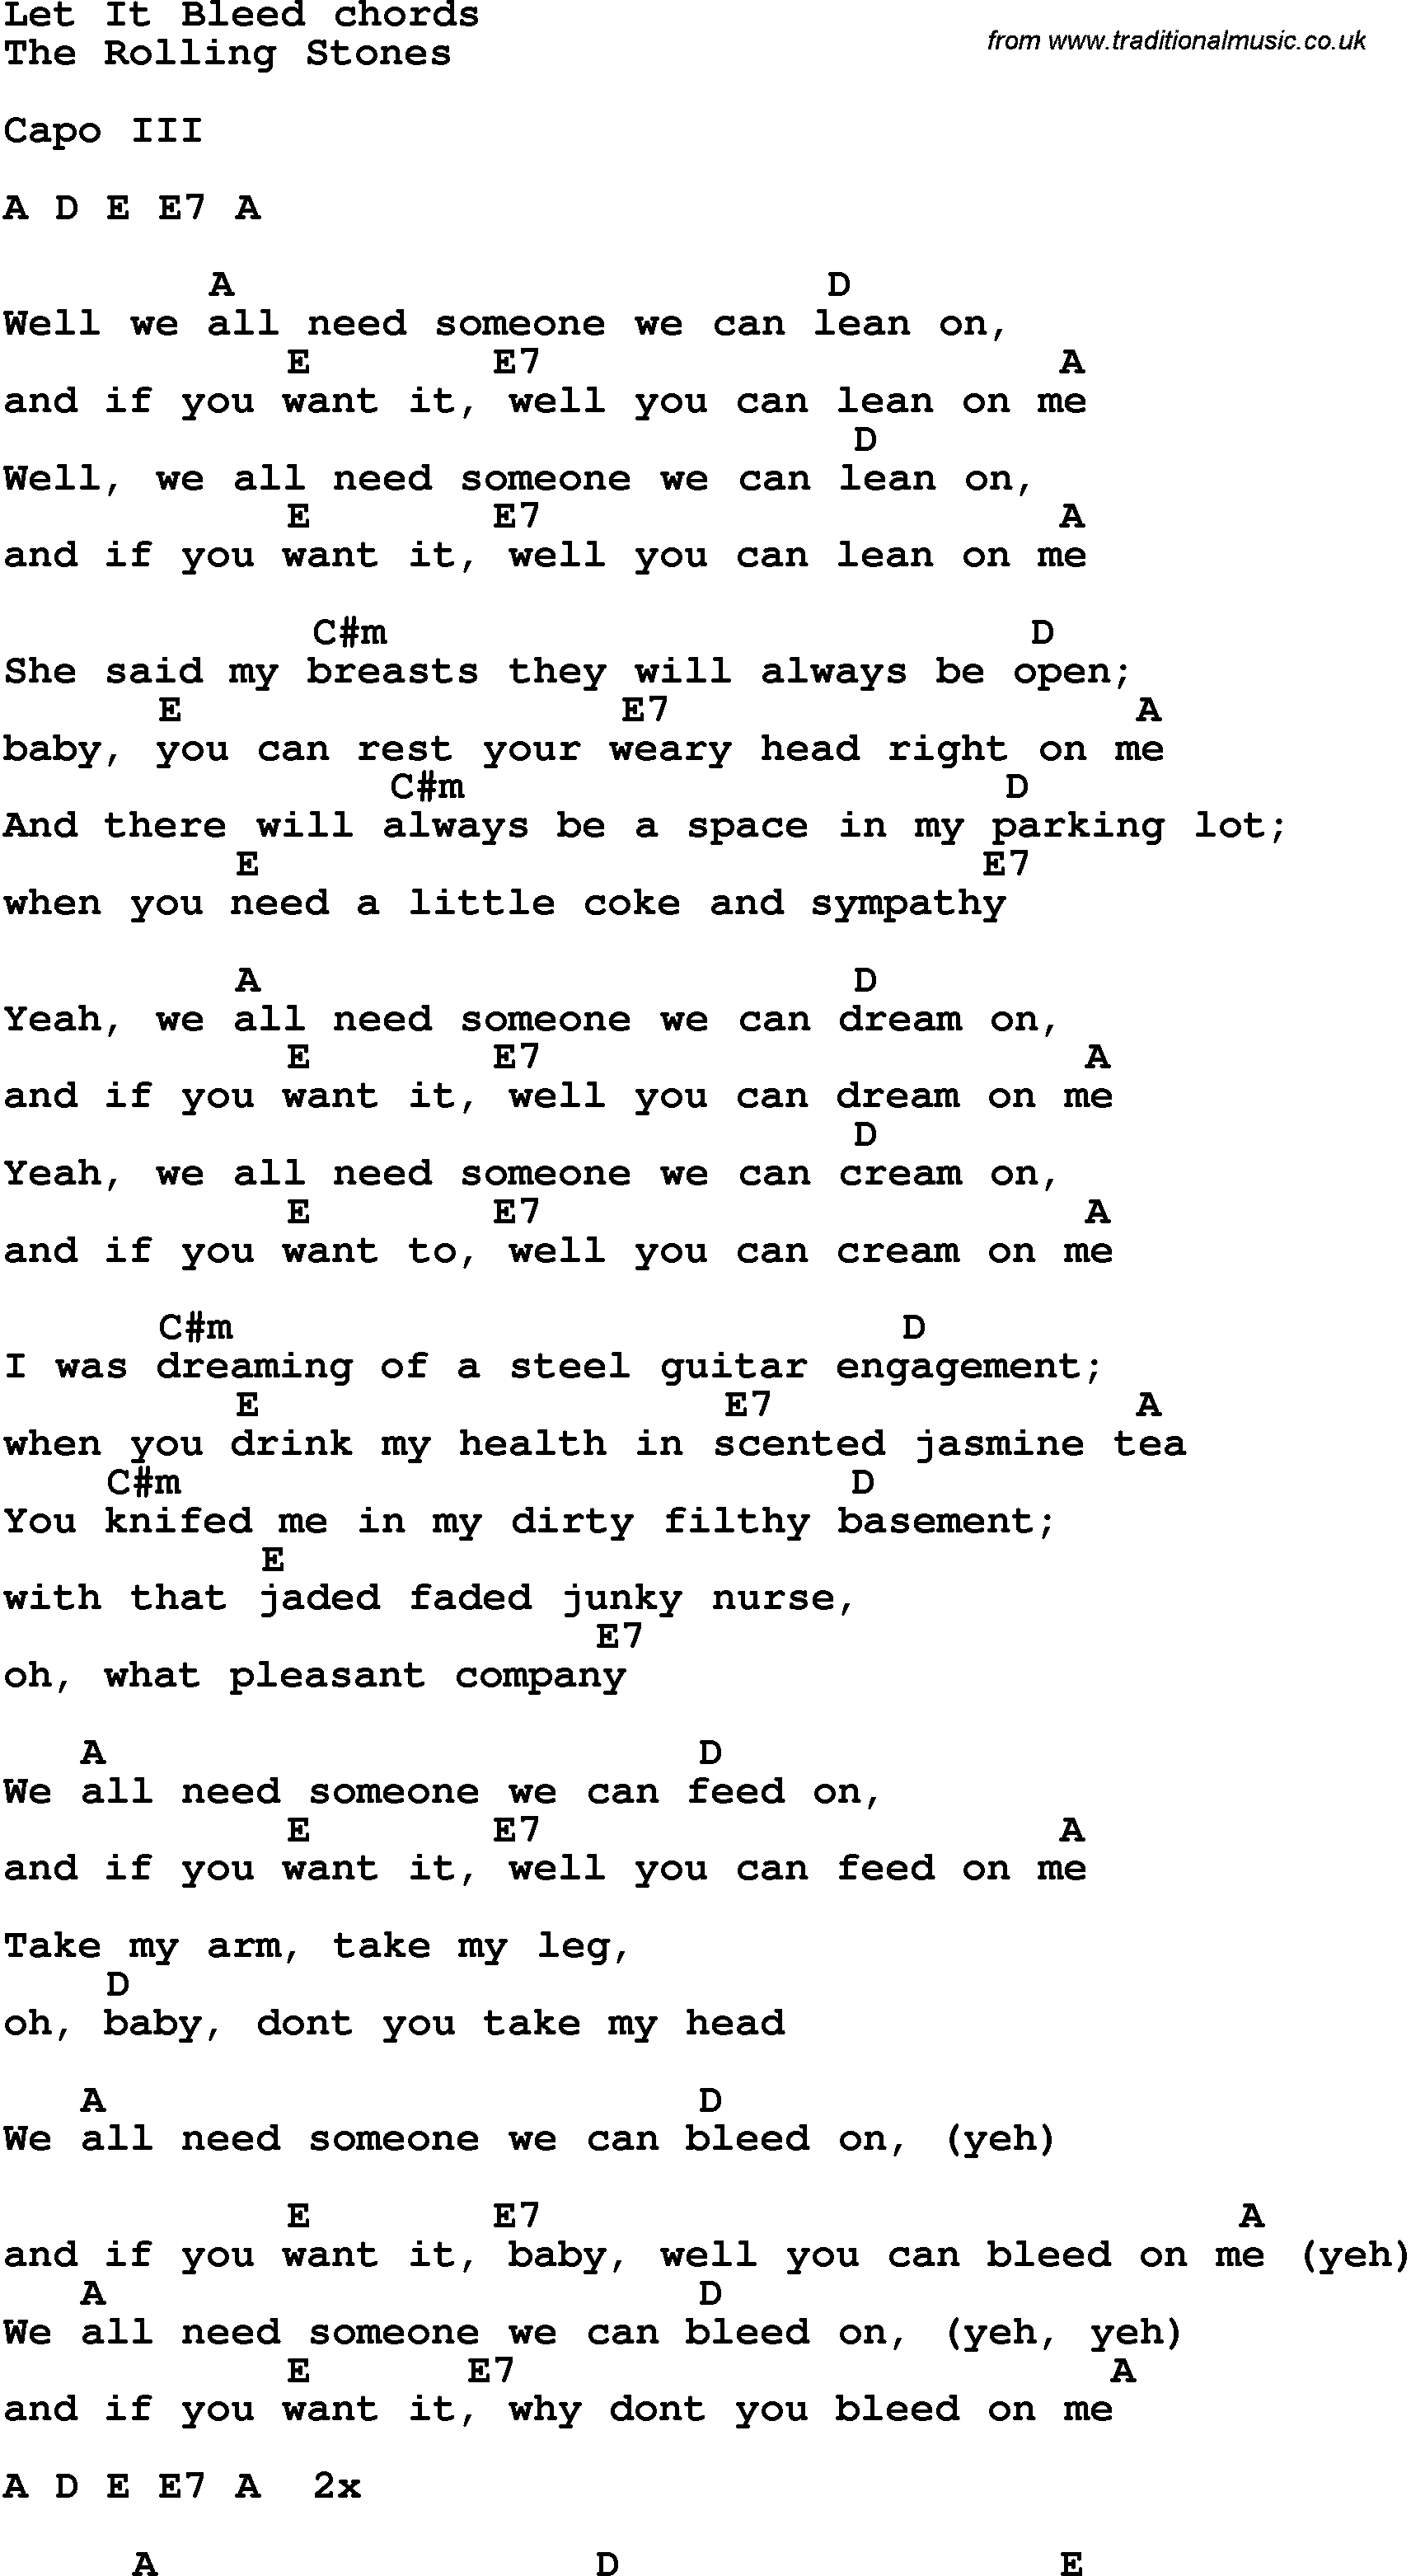 Song Lyrics with guitar chords for Let It Bleed